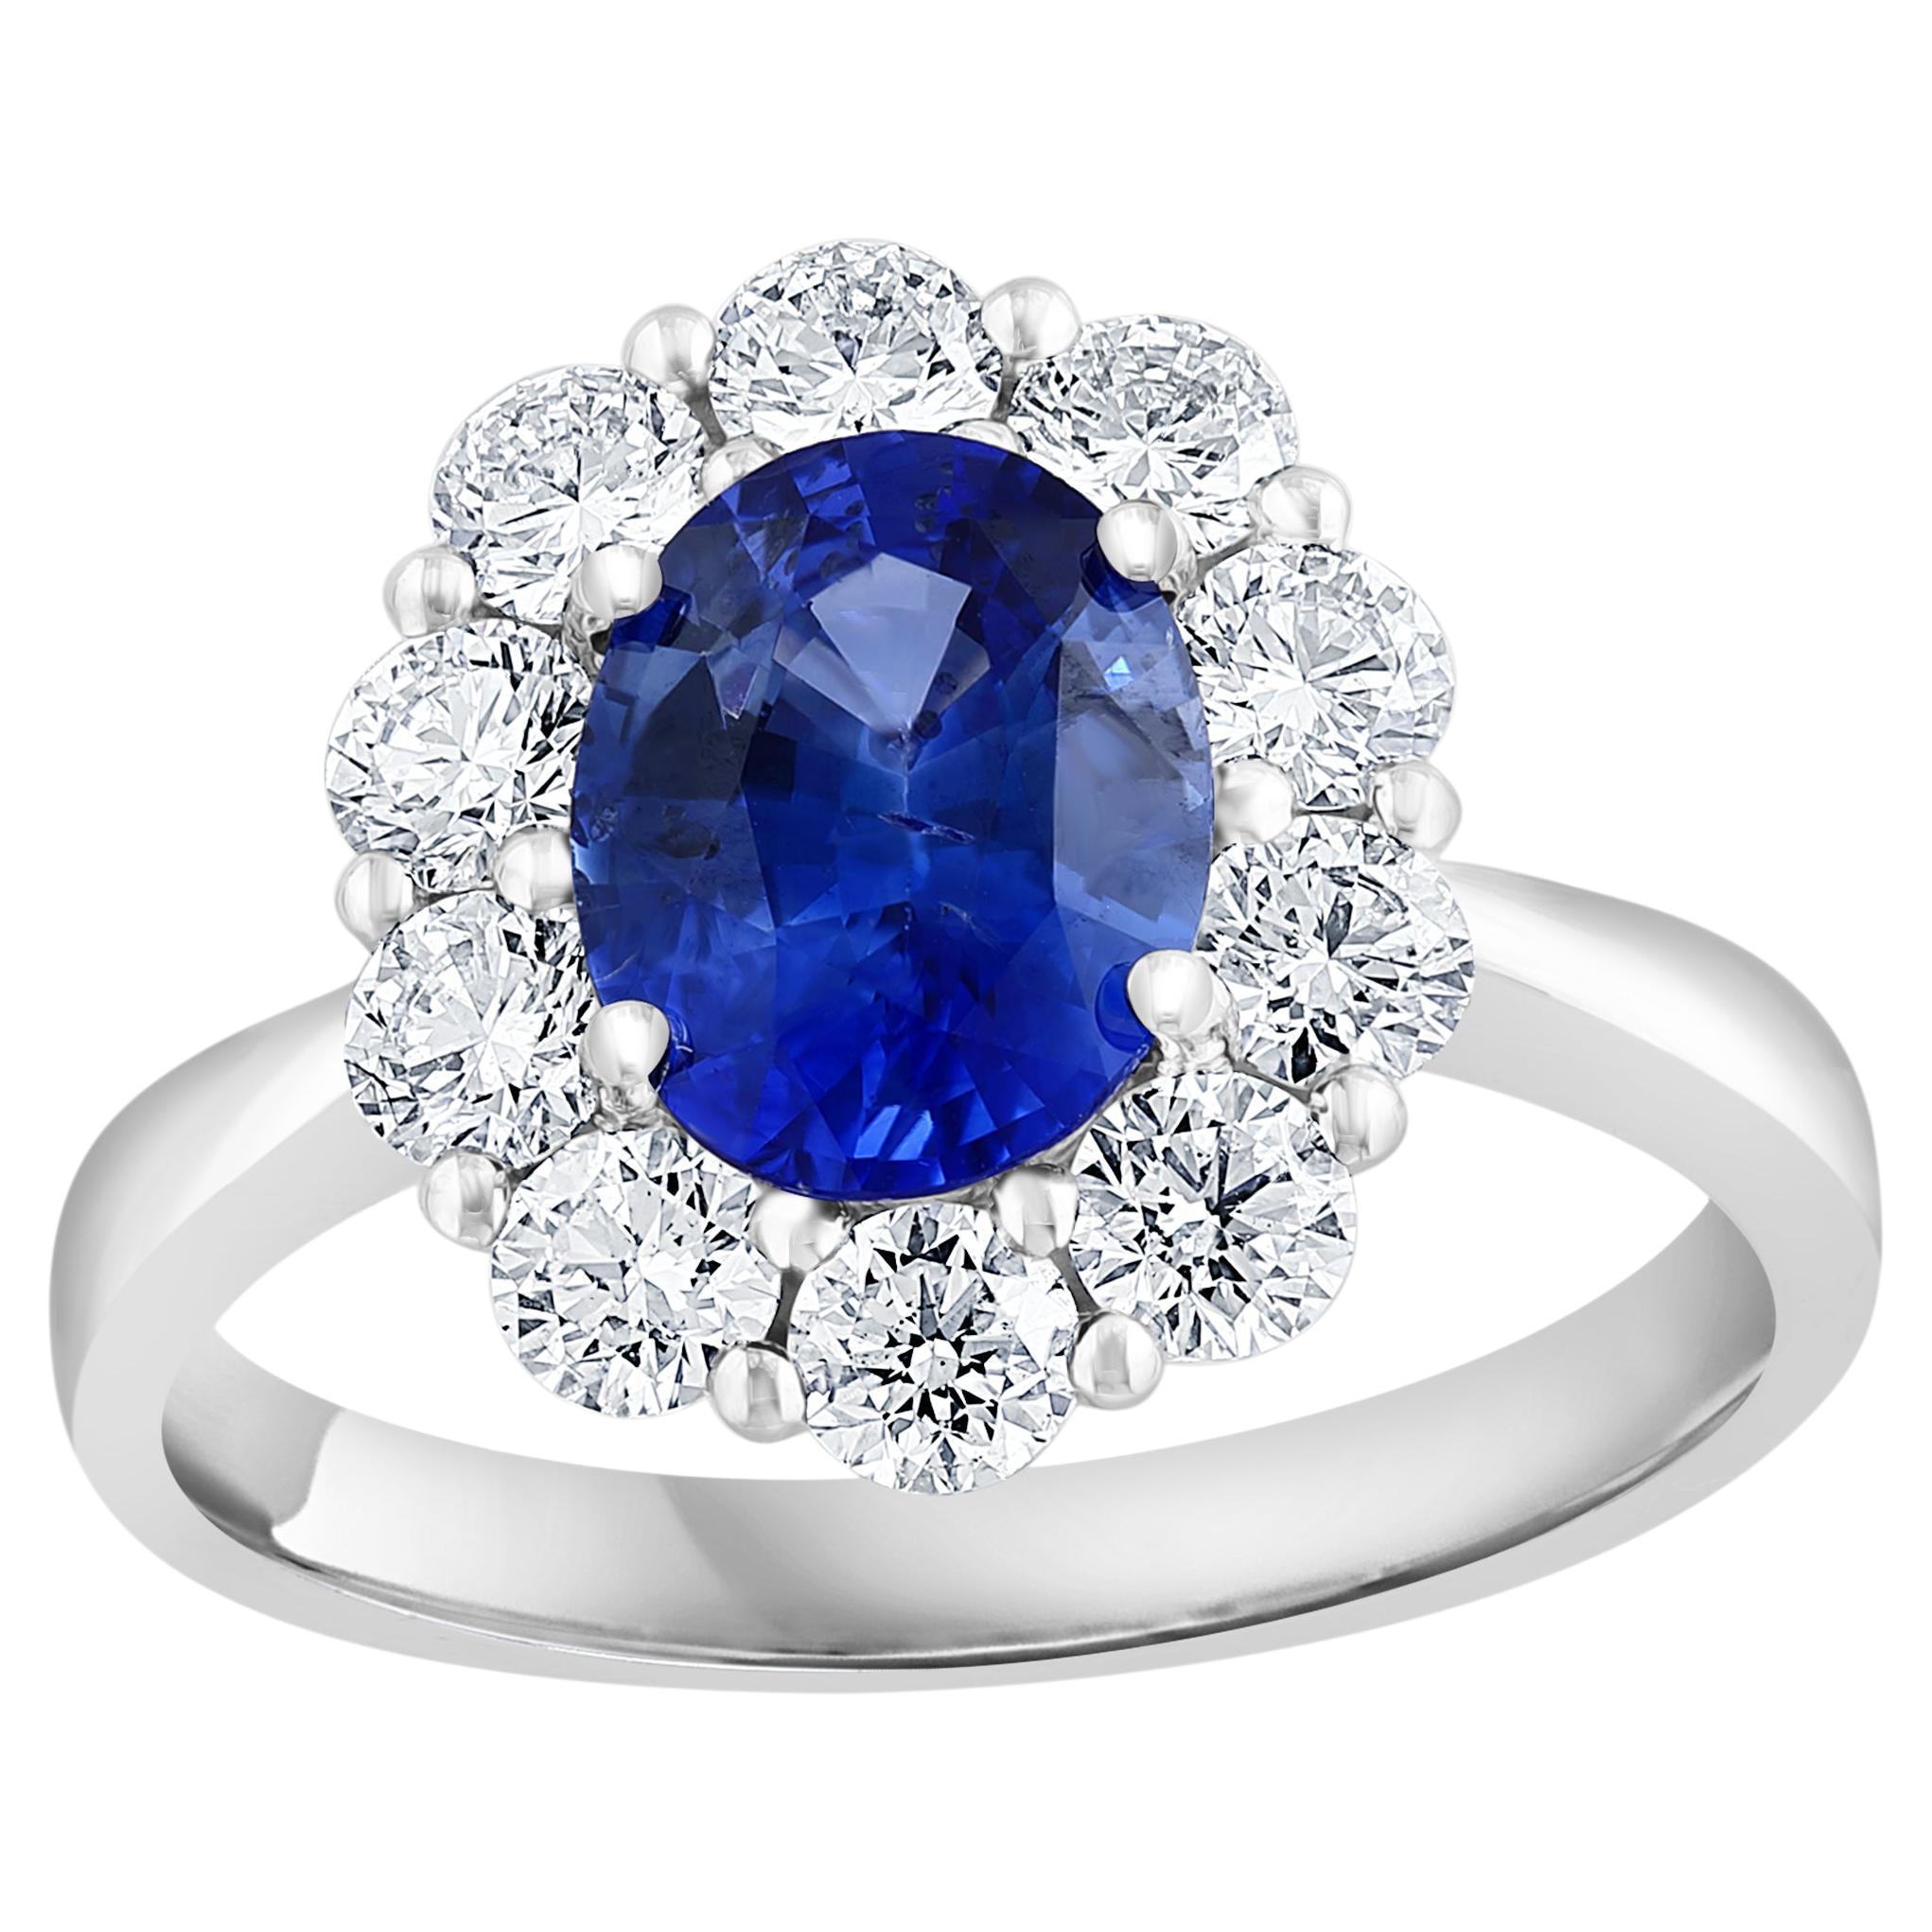 1.87 Carat Oval Cut Sapphire and Diamond Engagement Ring in 18K White Gold For Sale